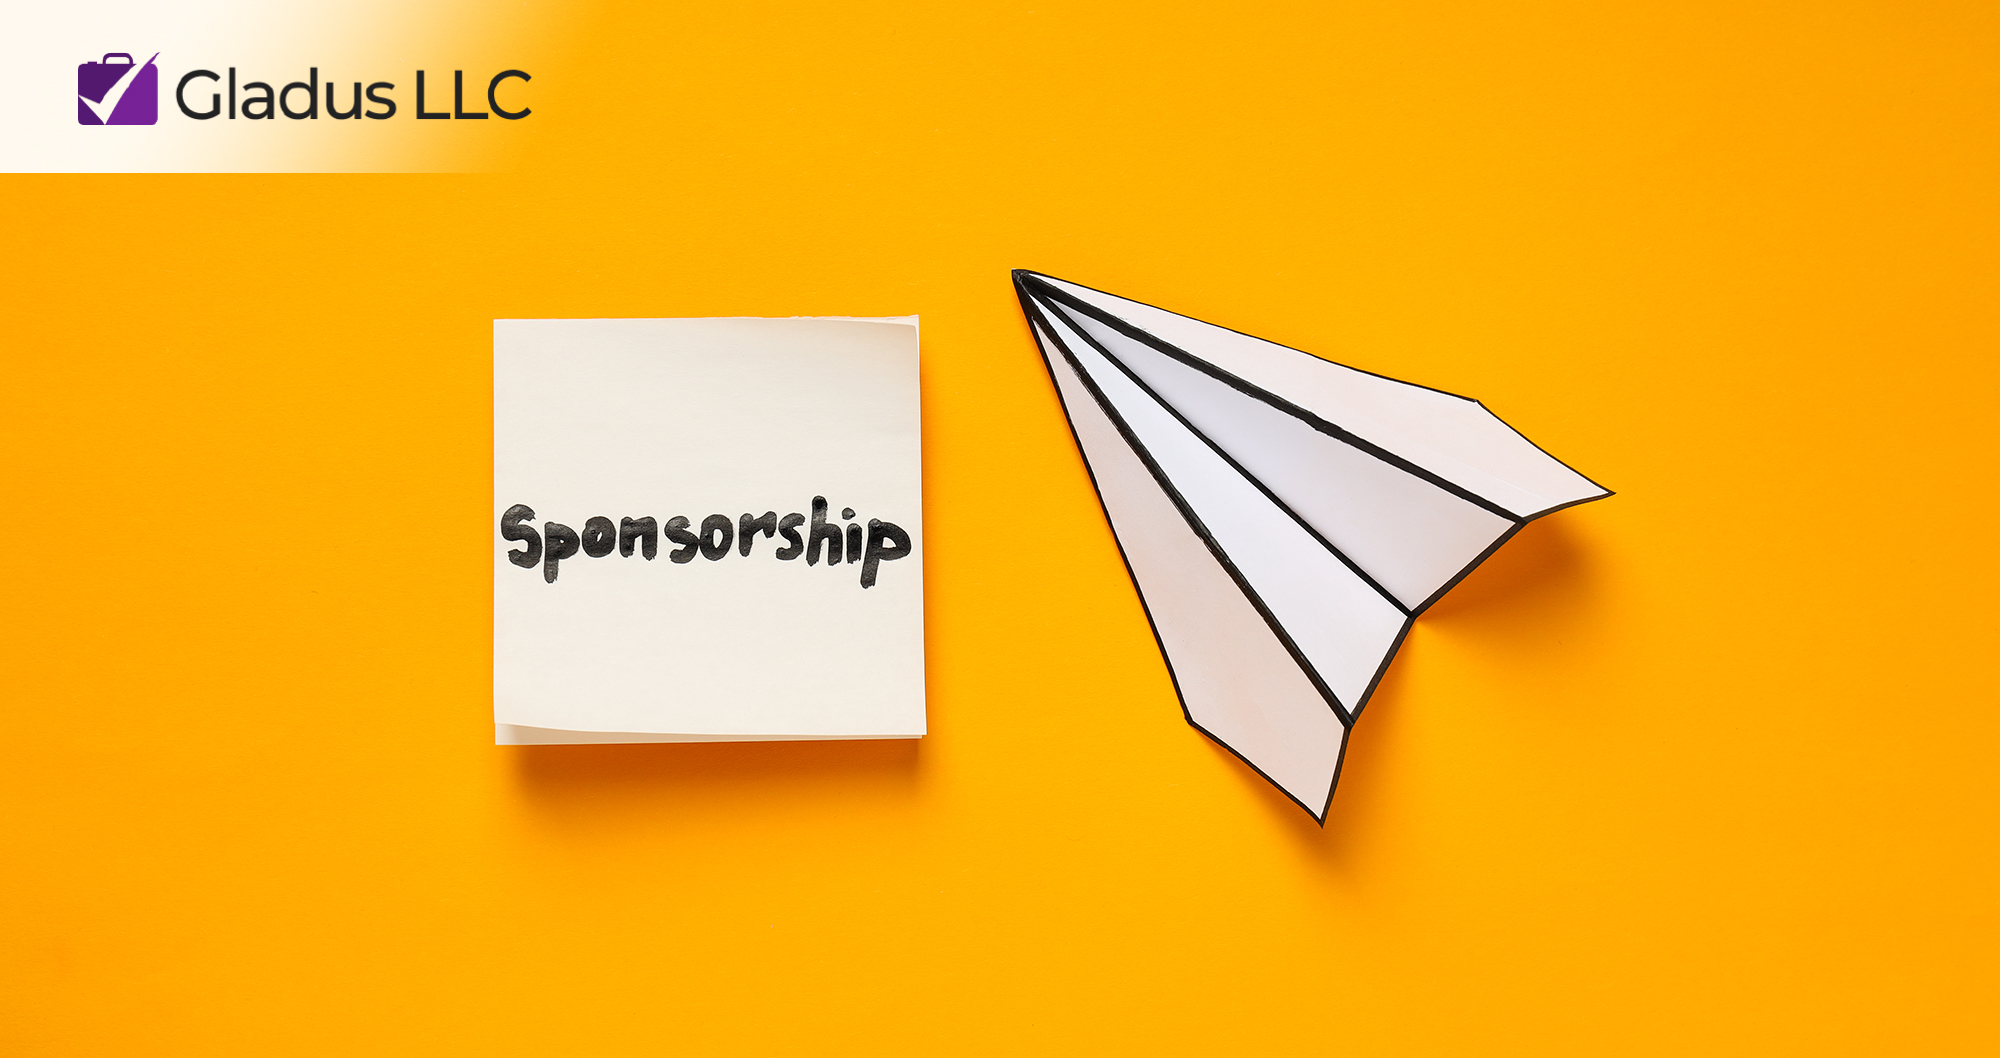 How to approach local businesses for sponsorship?